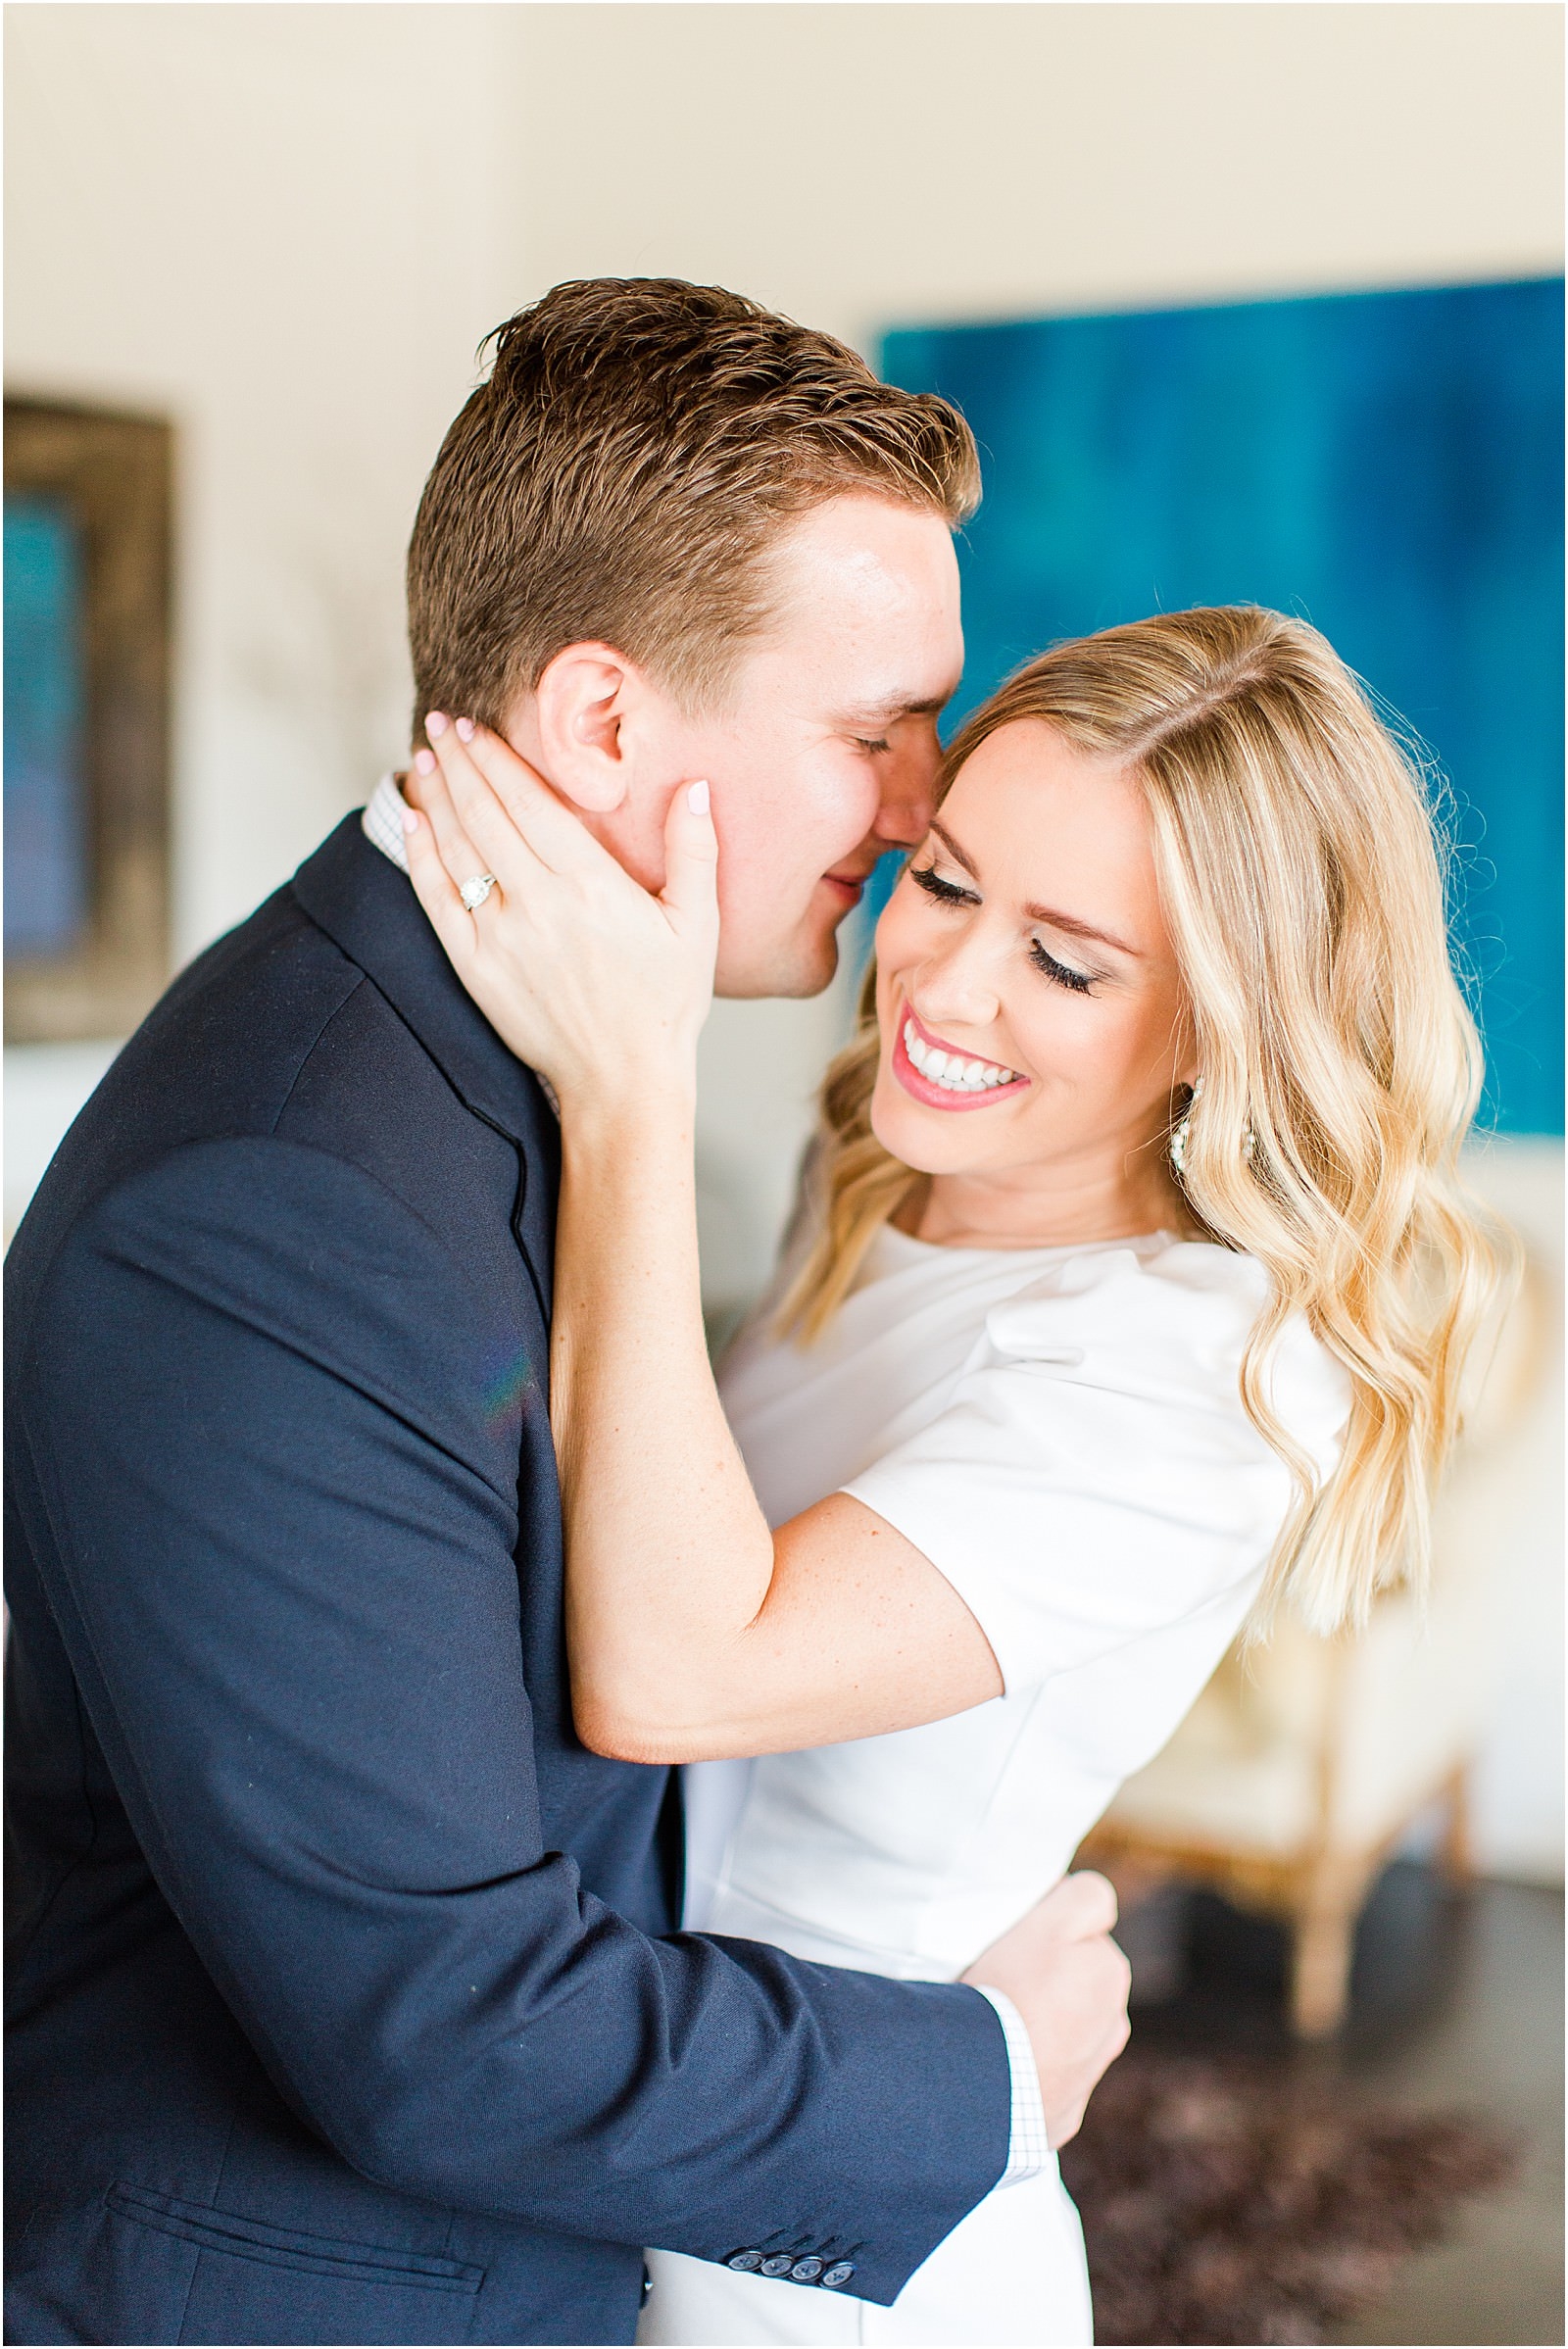 Madison and Christaan | A 20 West Engagement Session in Downto wn Newburgh | Bret and Brandie Photography001.jpg